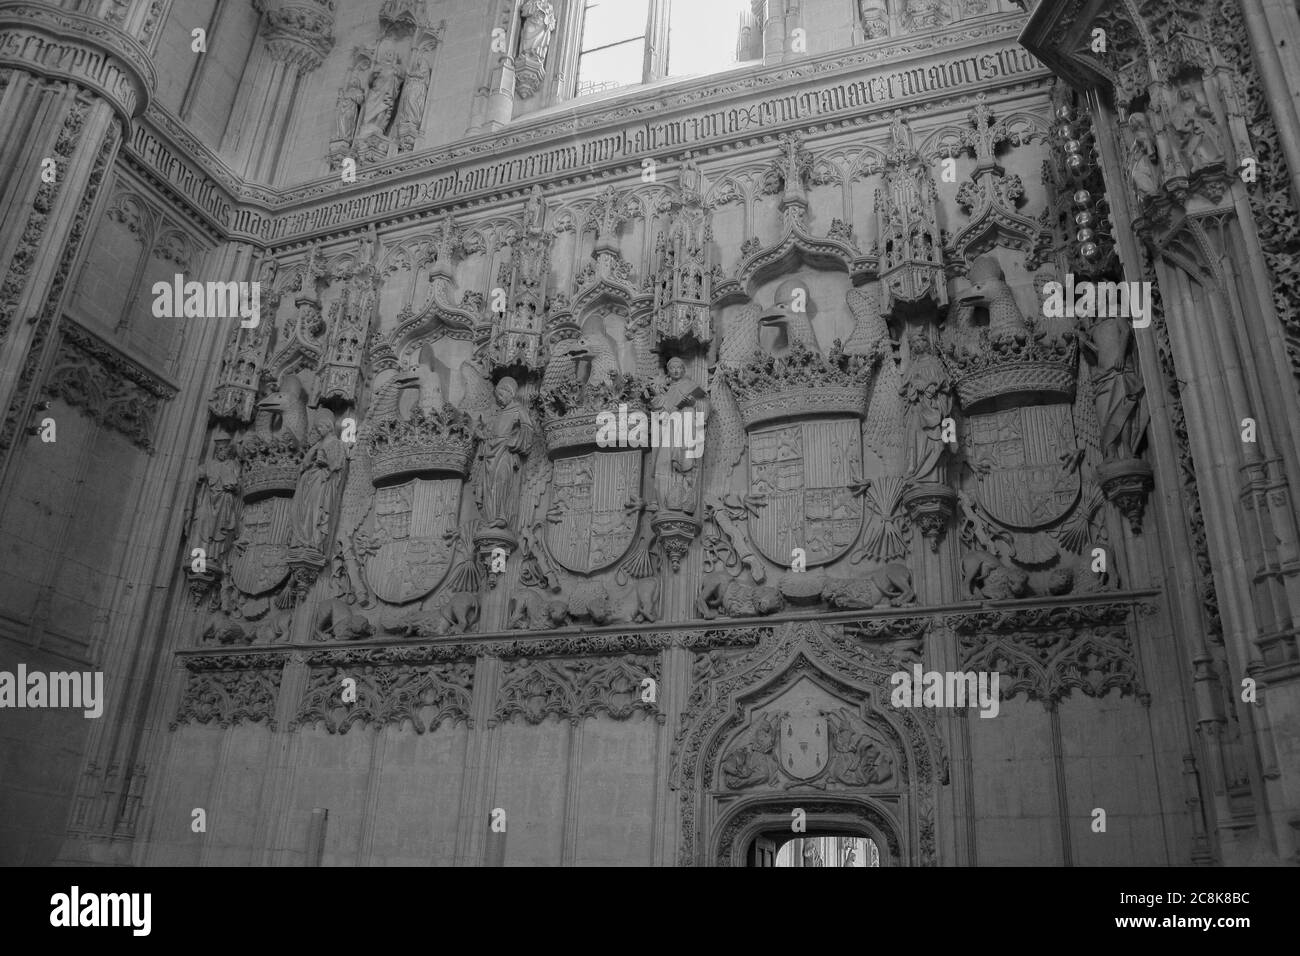 Toledo, Castilla-La Mancha, Spain, Europe. Monastery of San Juan de los Reyes (14771504). Inside, a wall of the church with bas-reliefs depicting coats of arms and saints. Stock Photo